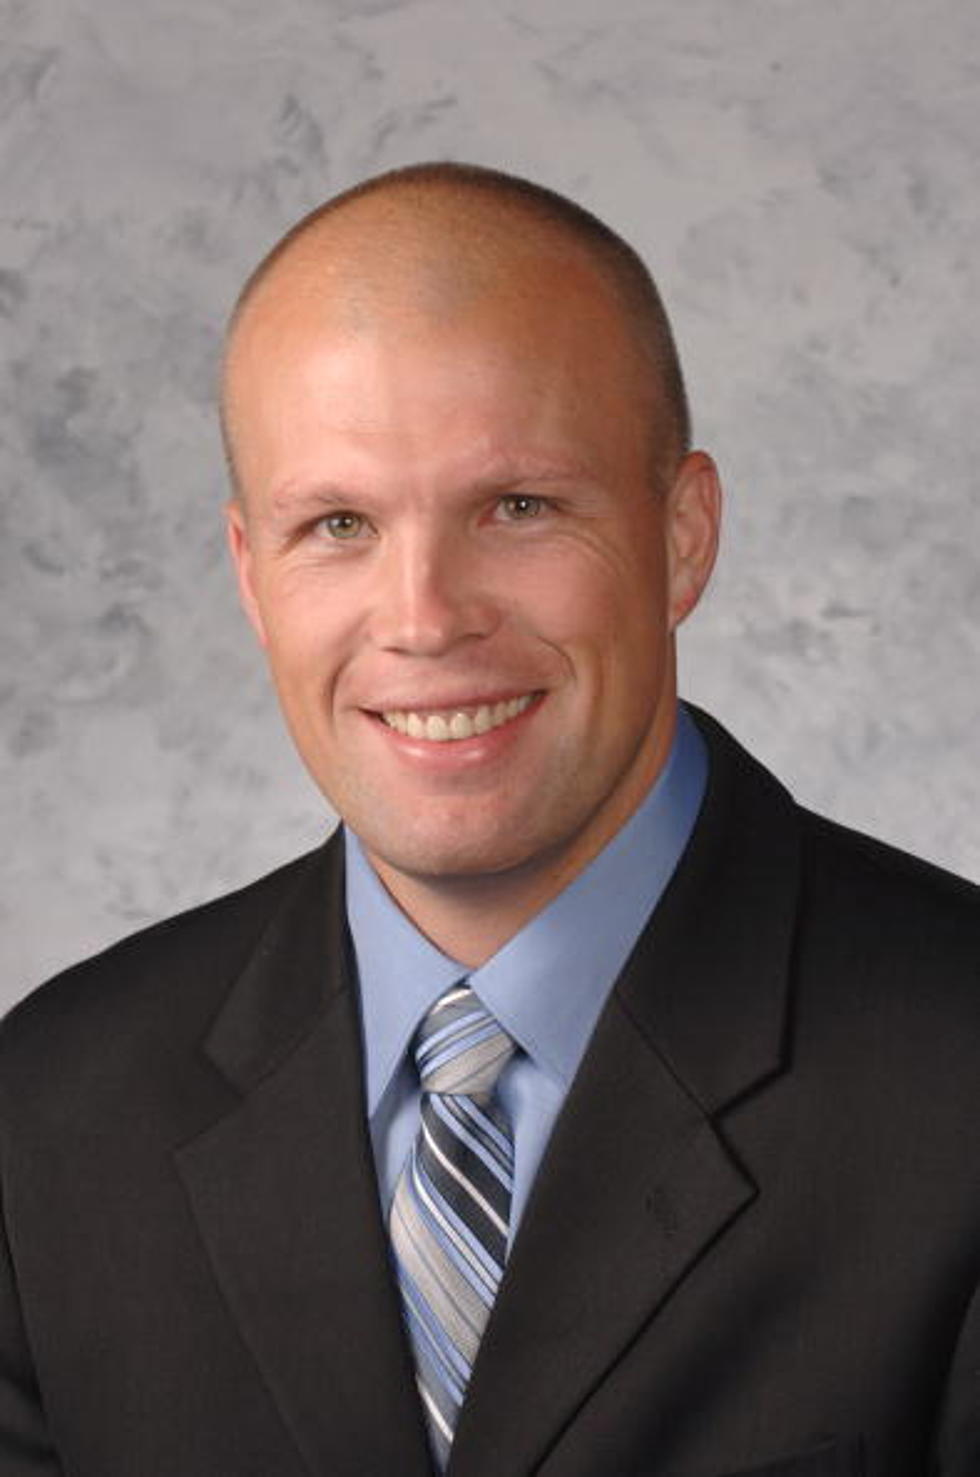 Minnesota Wild Hire 37 Year-Old Mike Yeo As New Head Coach